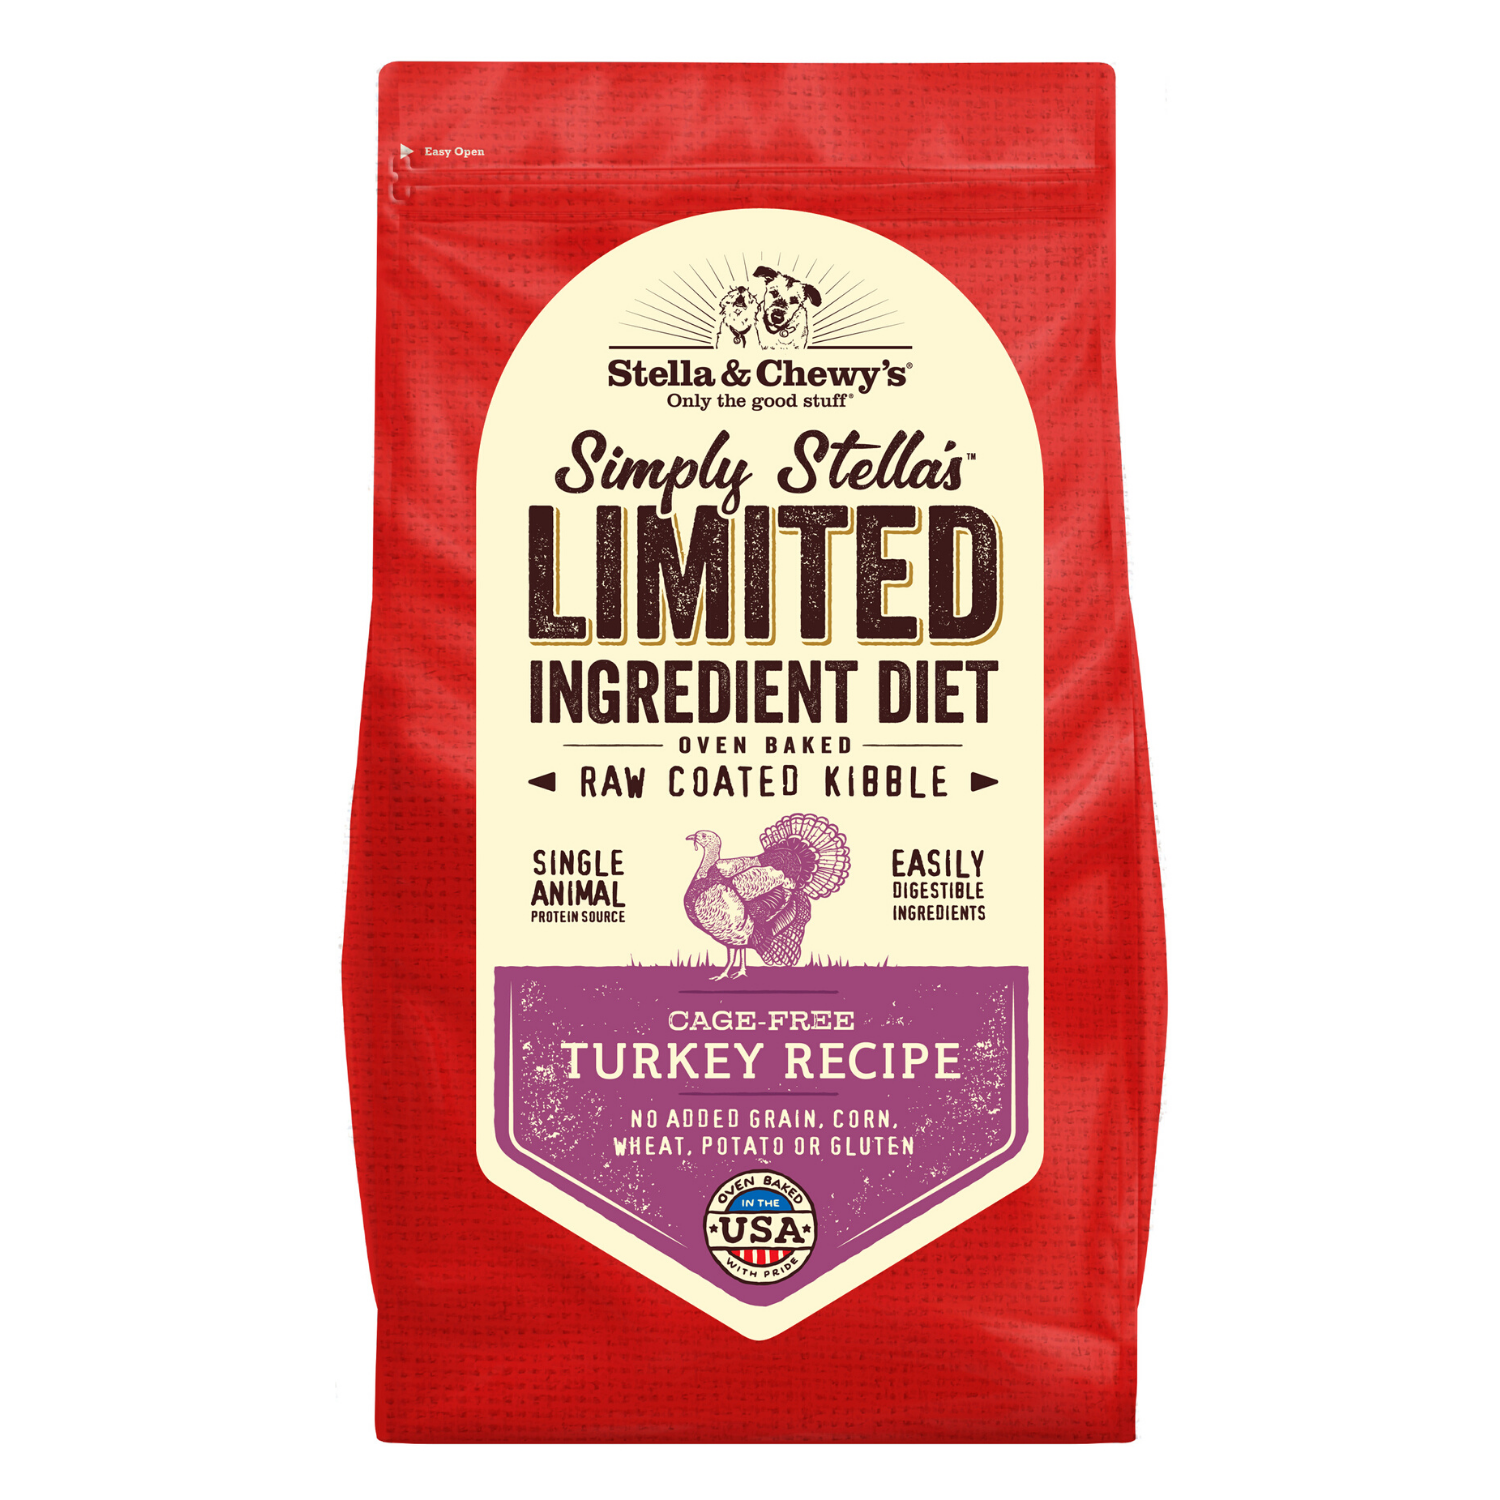 [DISCONTINUED] Stella & Chewy’s Simply Stella's Limited Ingredients Diet (Cage Free Turkey) - 1.59kg / 9.98kg